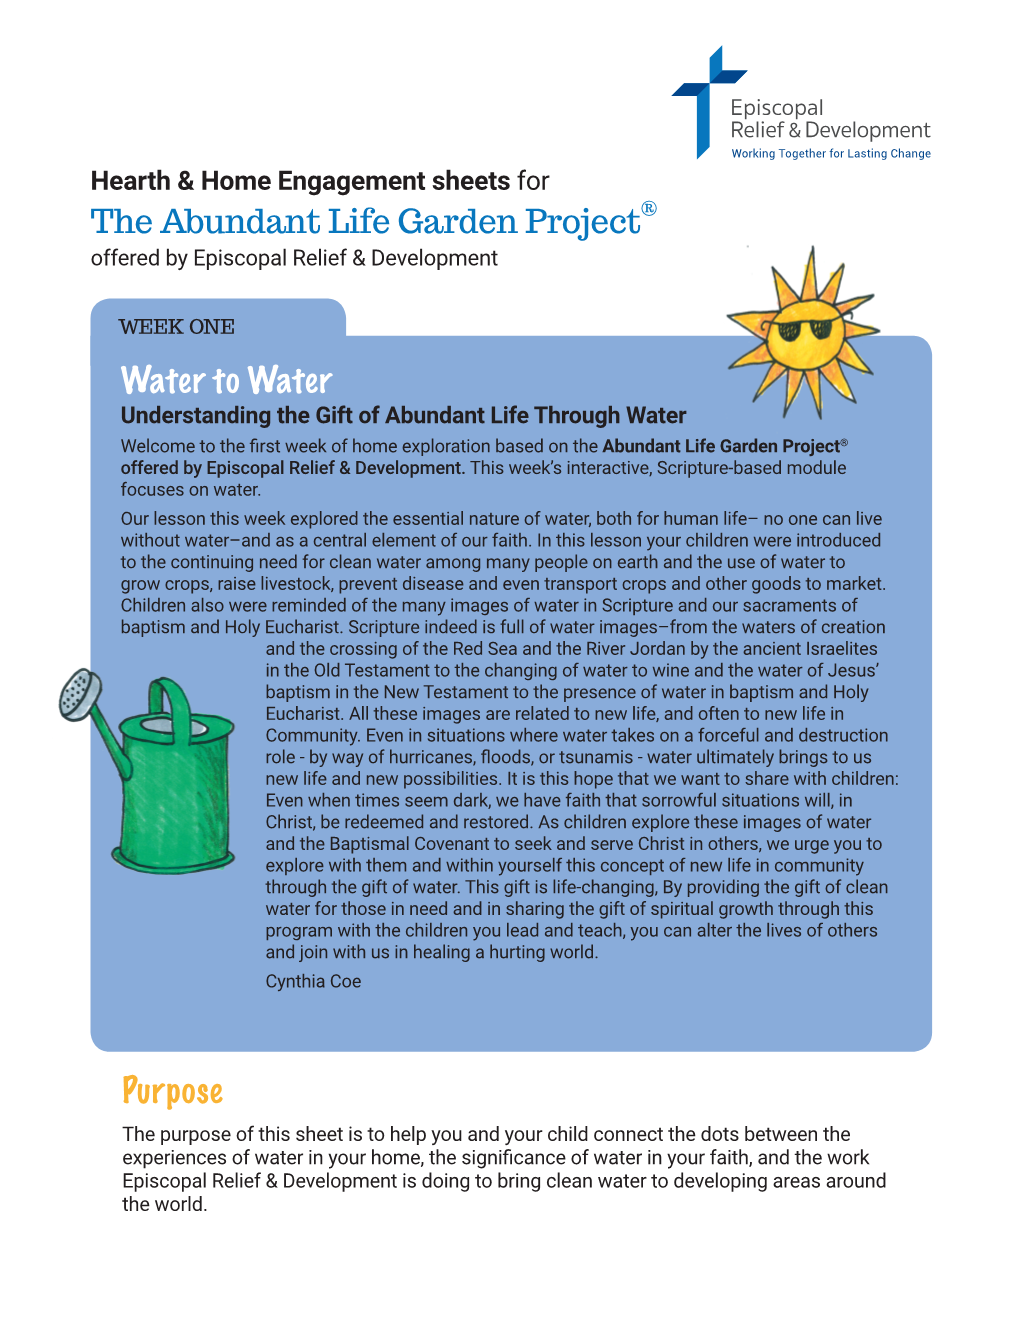 Water to Water Purpose the Abundant Life Garden Project®